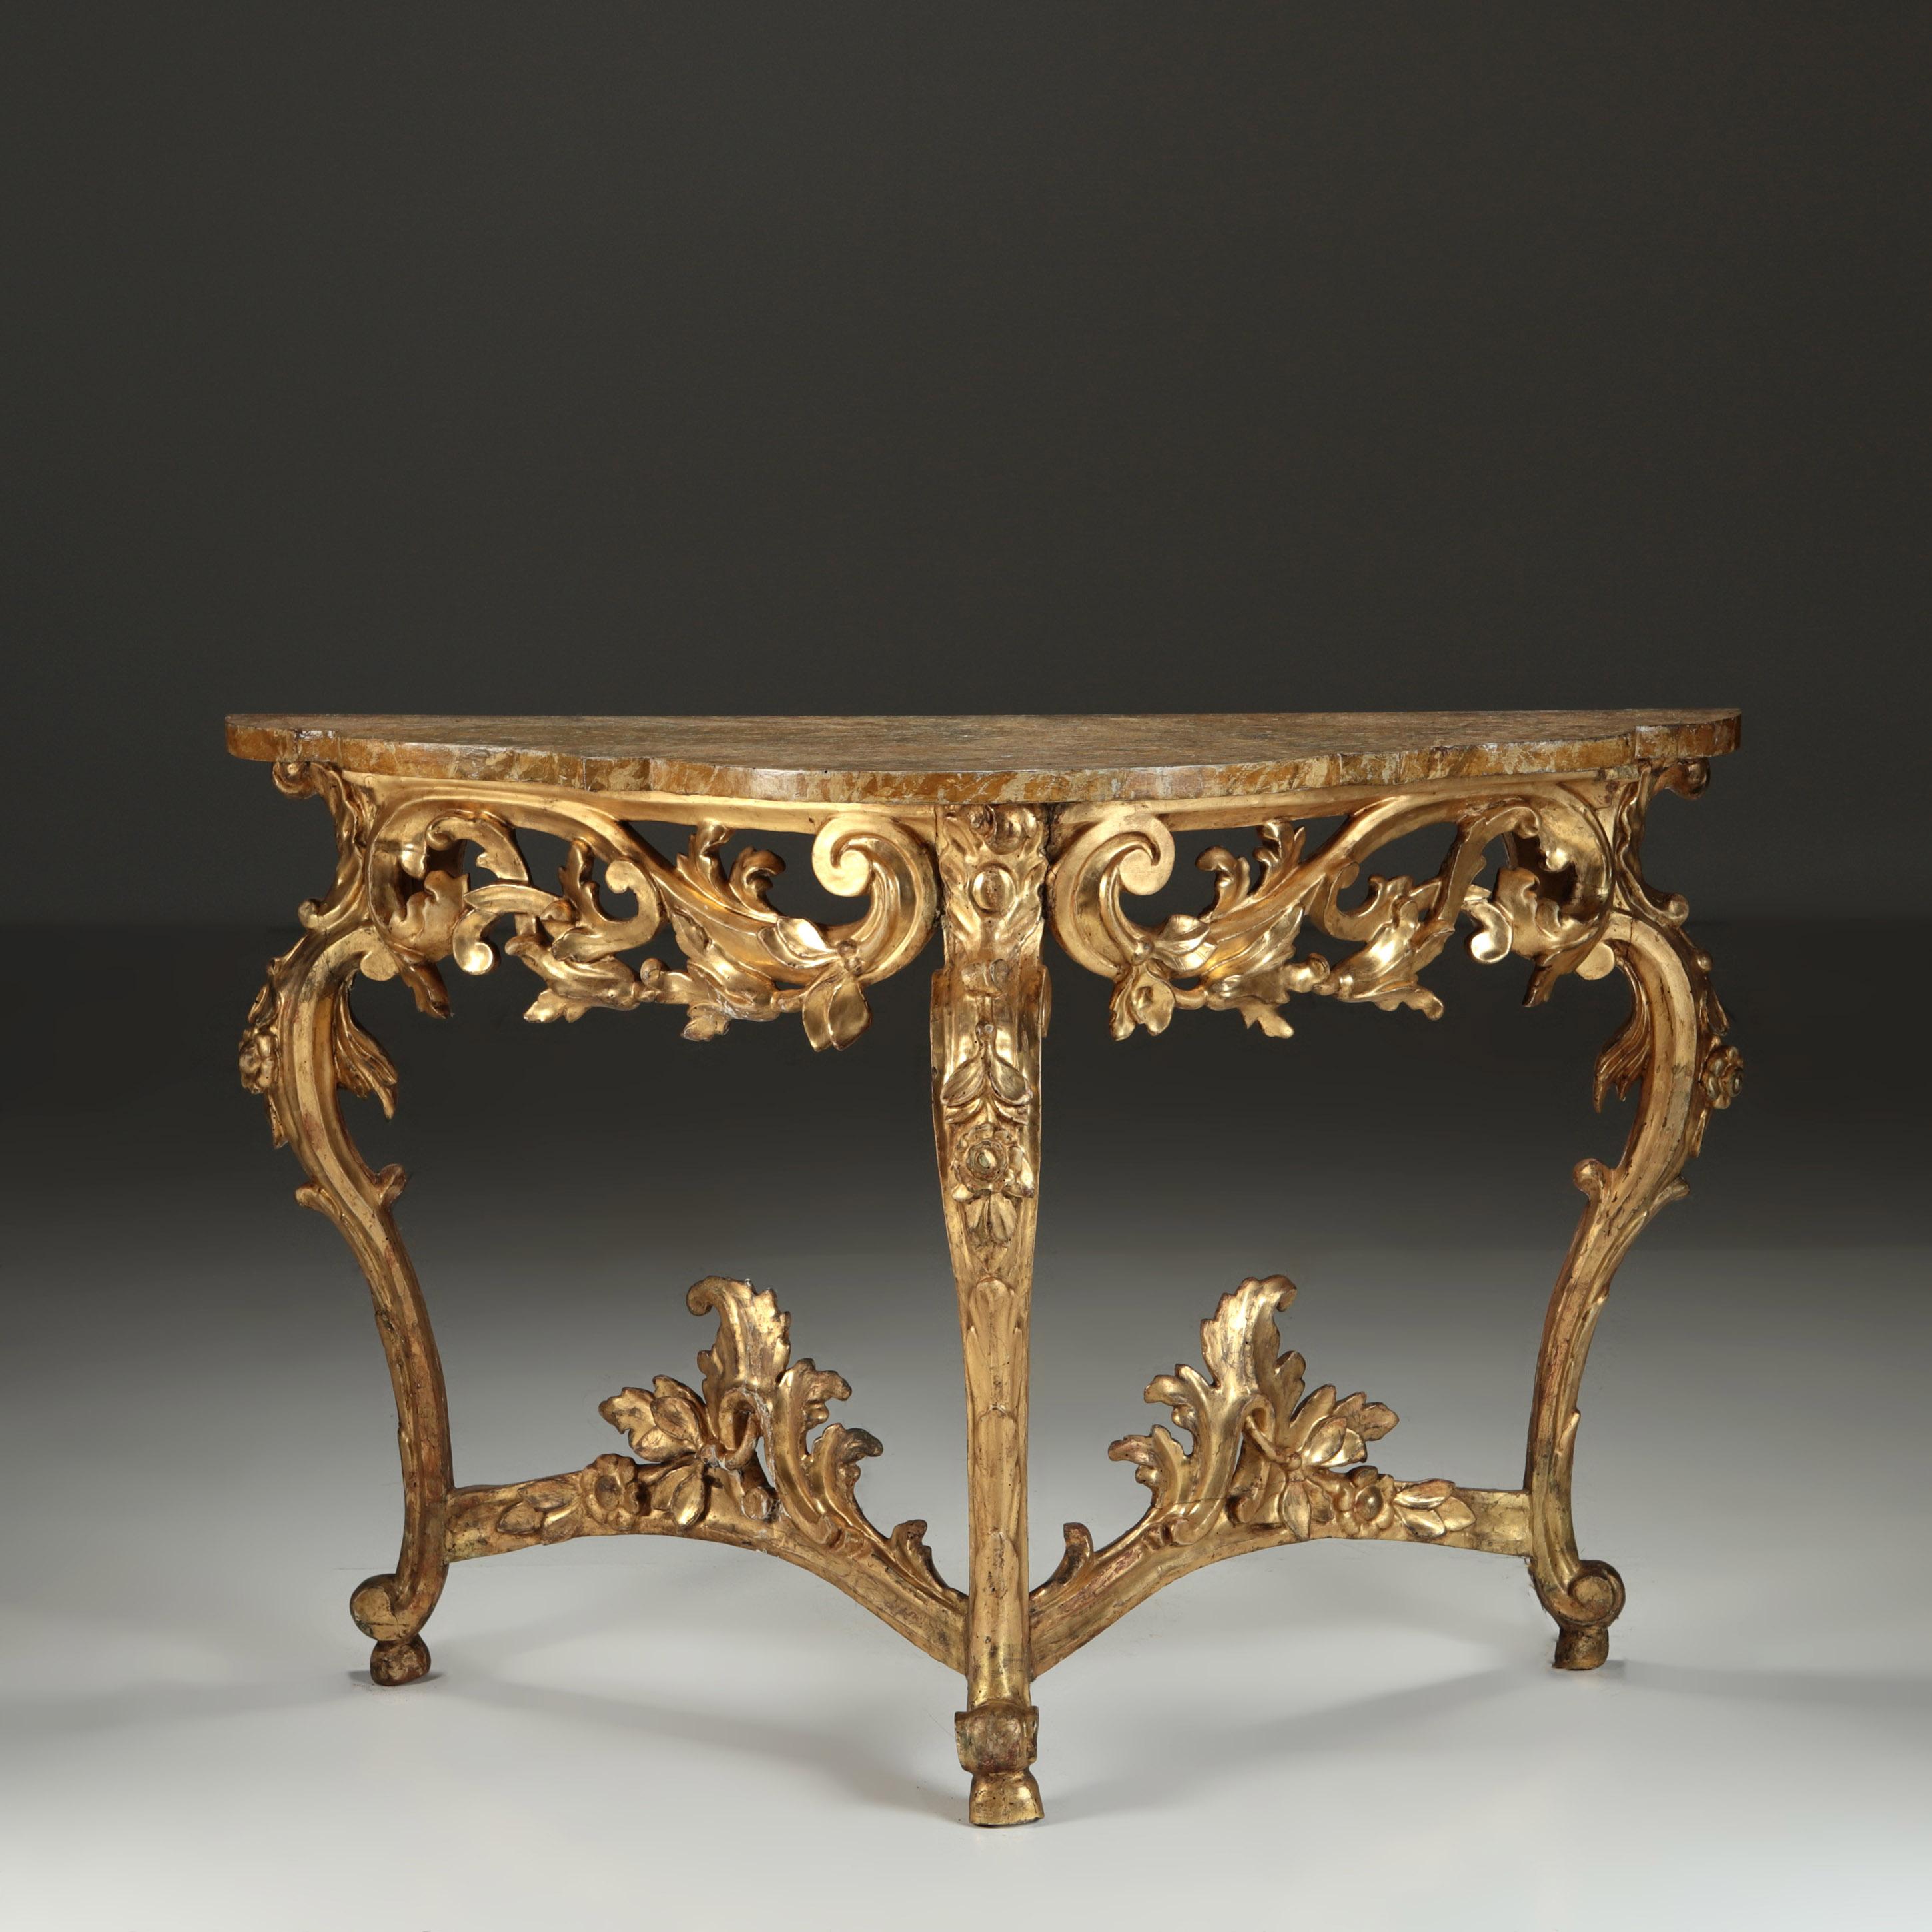 ITALIAN CONSOLES, circa 1800

A pair of carved gilt wood Italian console tables, the tri-form bases are delicately carved with trailing flowers and garlands, presented with their original painted faux Siena marble tops.
